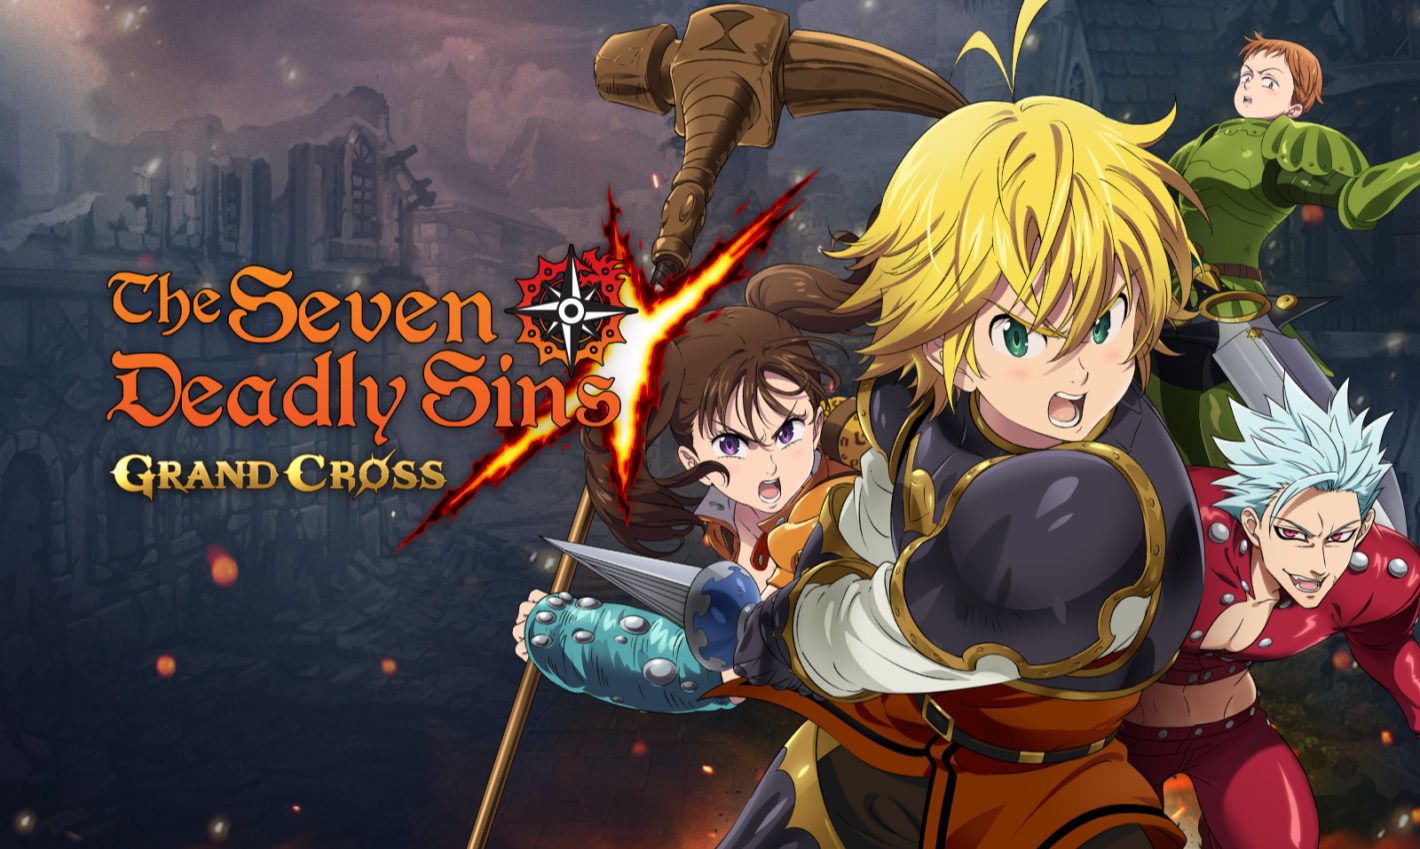 The global release of the mobile RPG The Seven Deadly Sins: Grand Cross